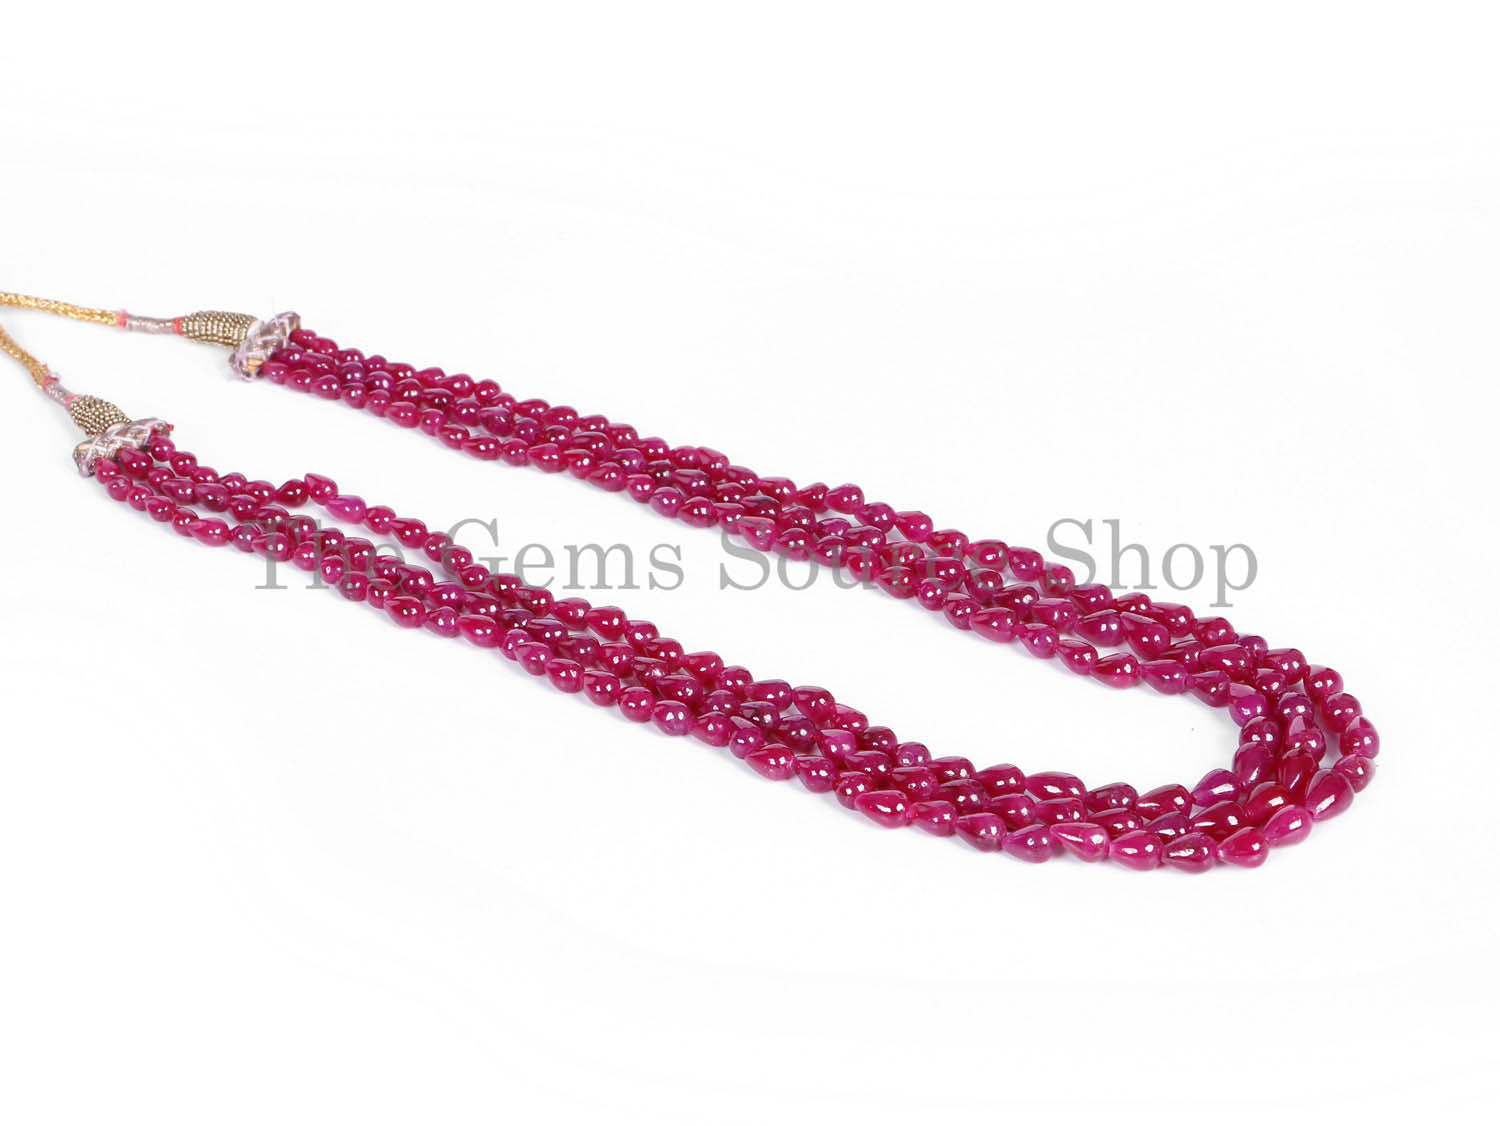 Ruby Gemstone Necklace, Ruby Smooth Drops Shape Necklace